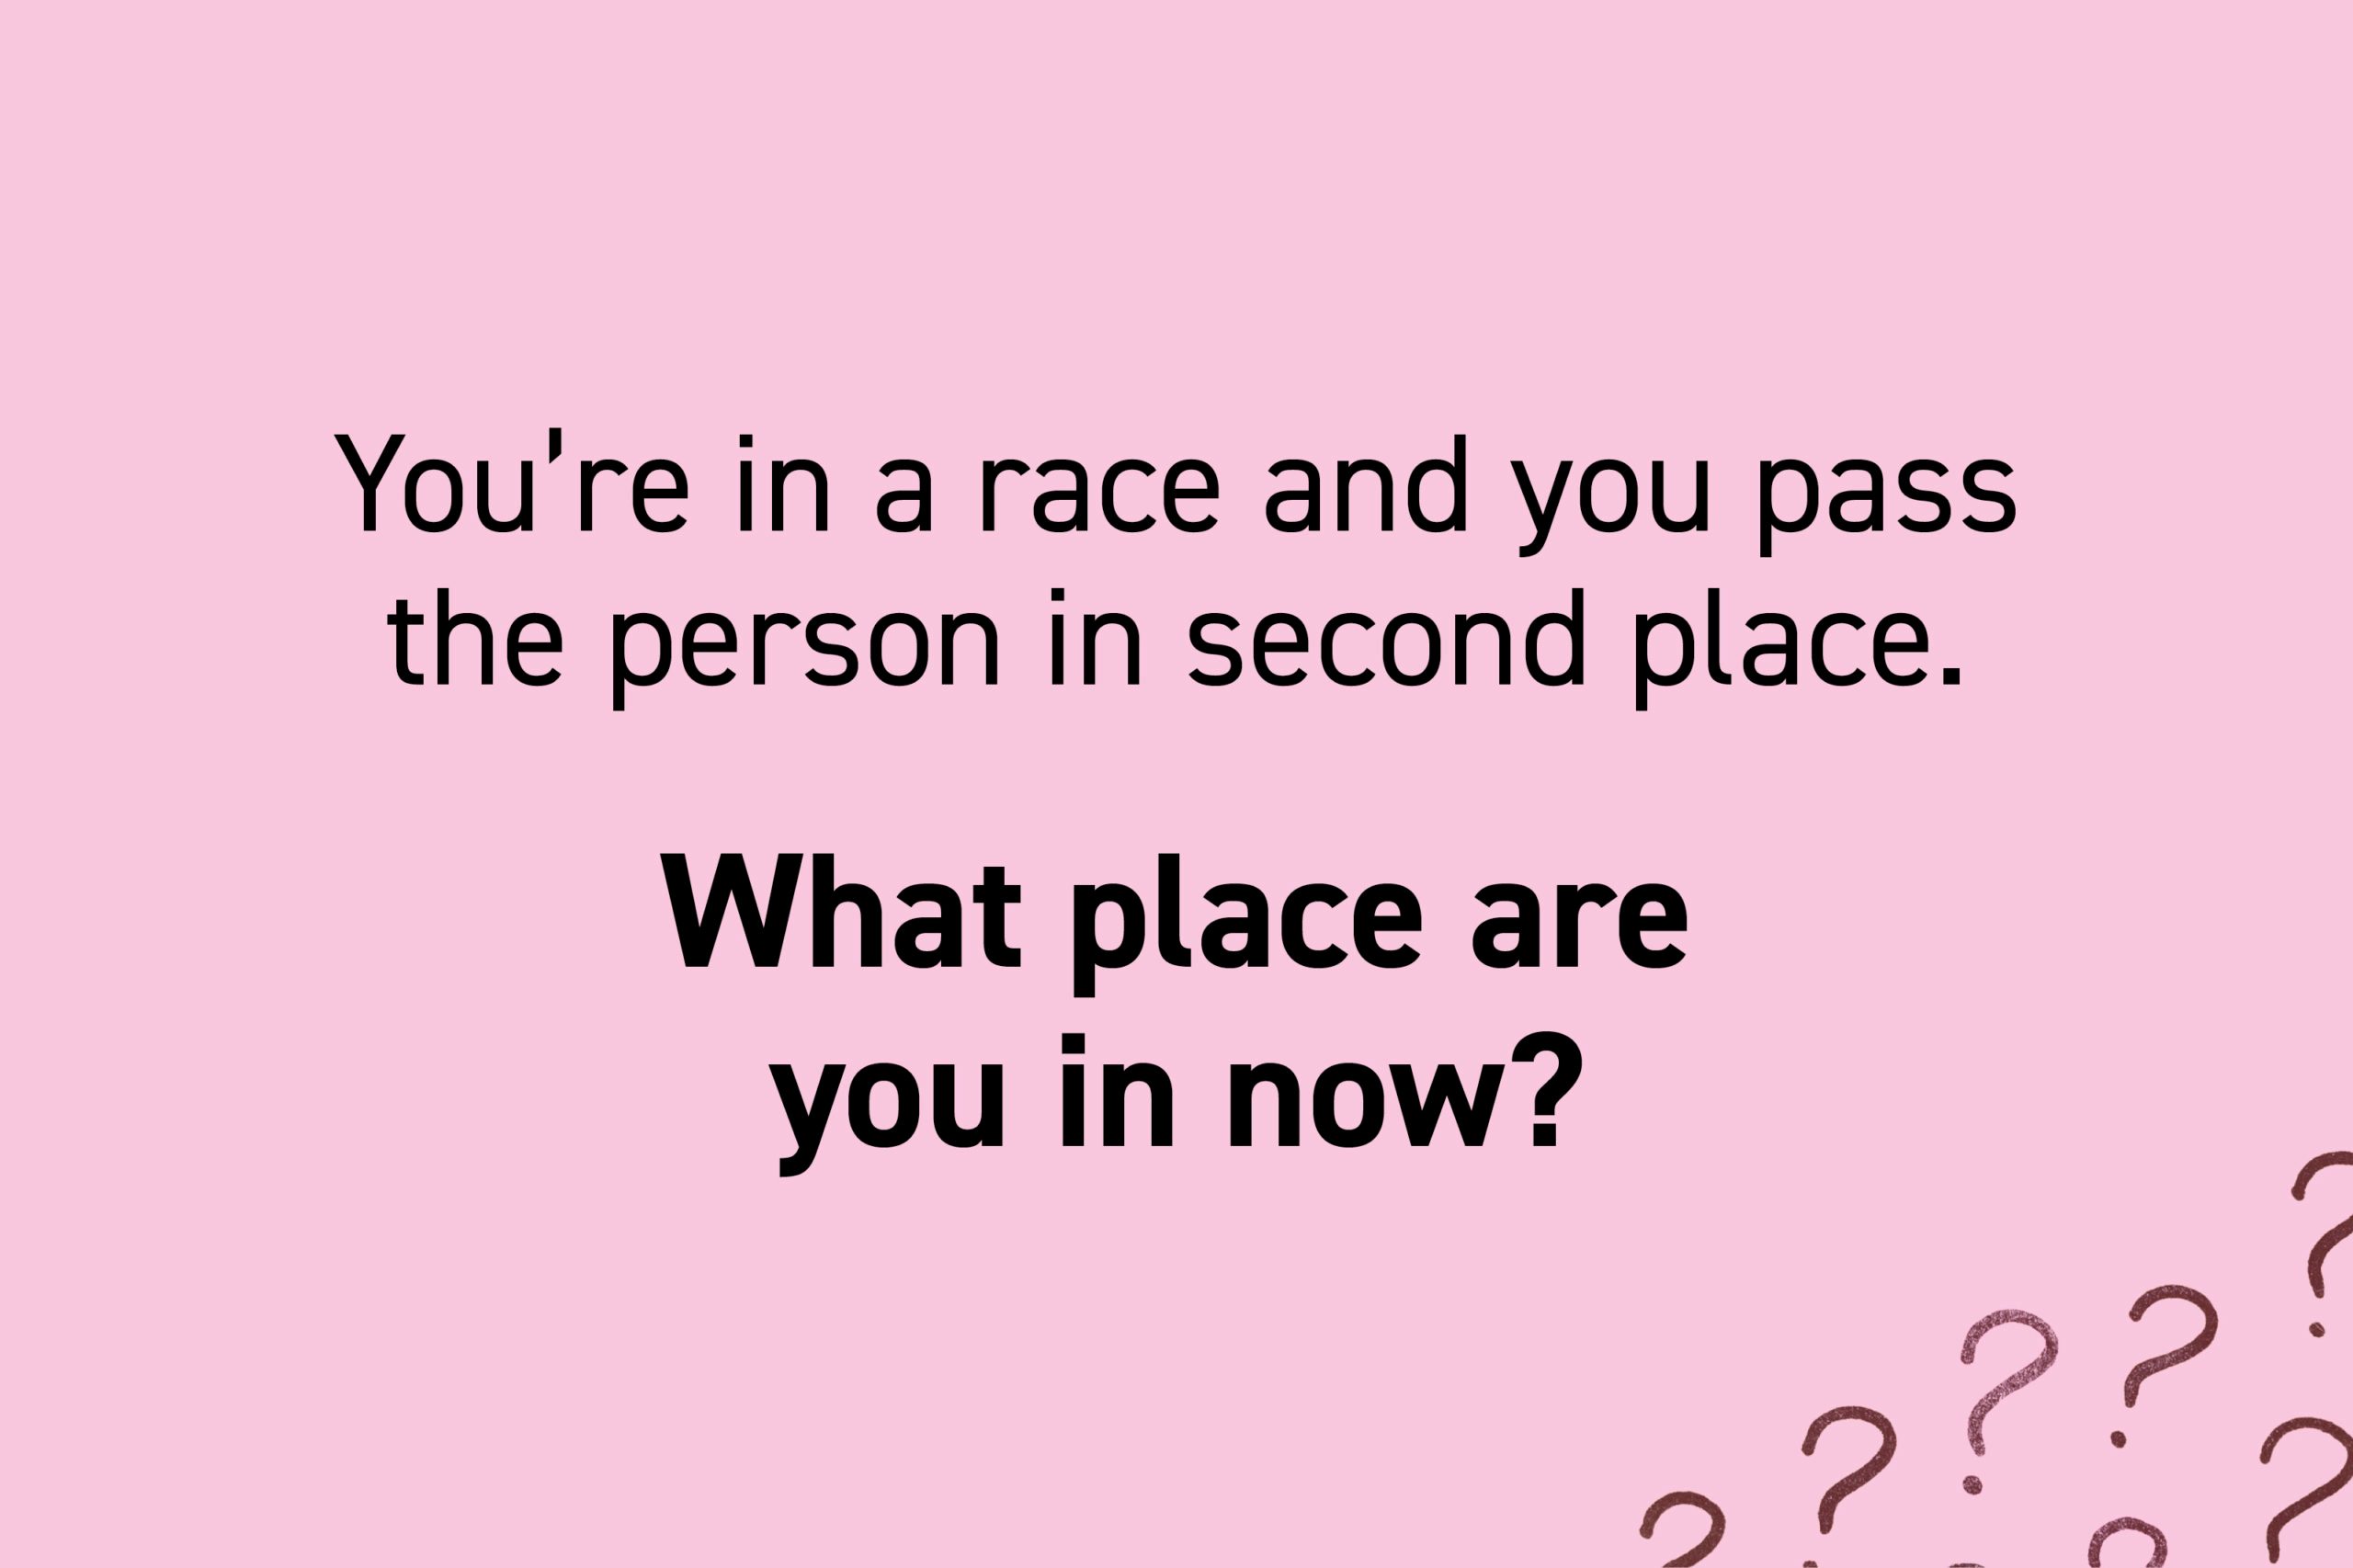 You're in a race and you pass the person in second place. What place are you in now?